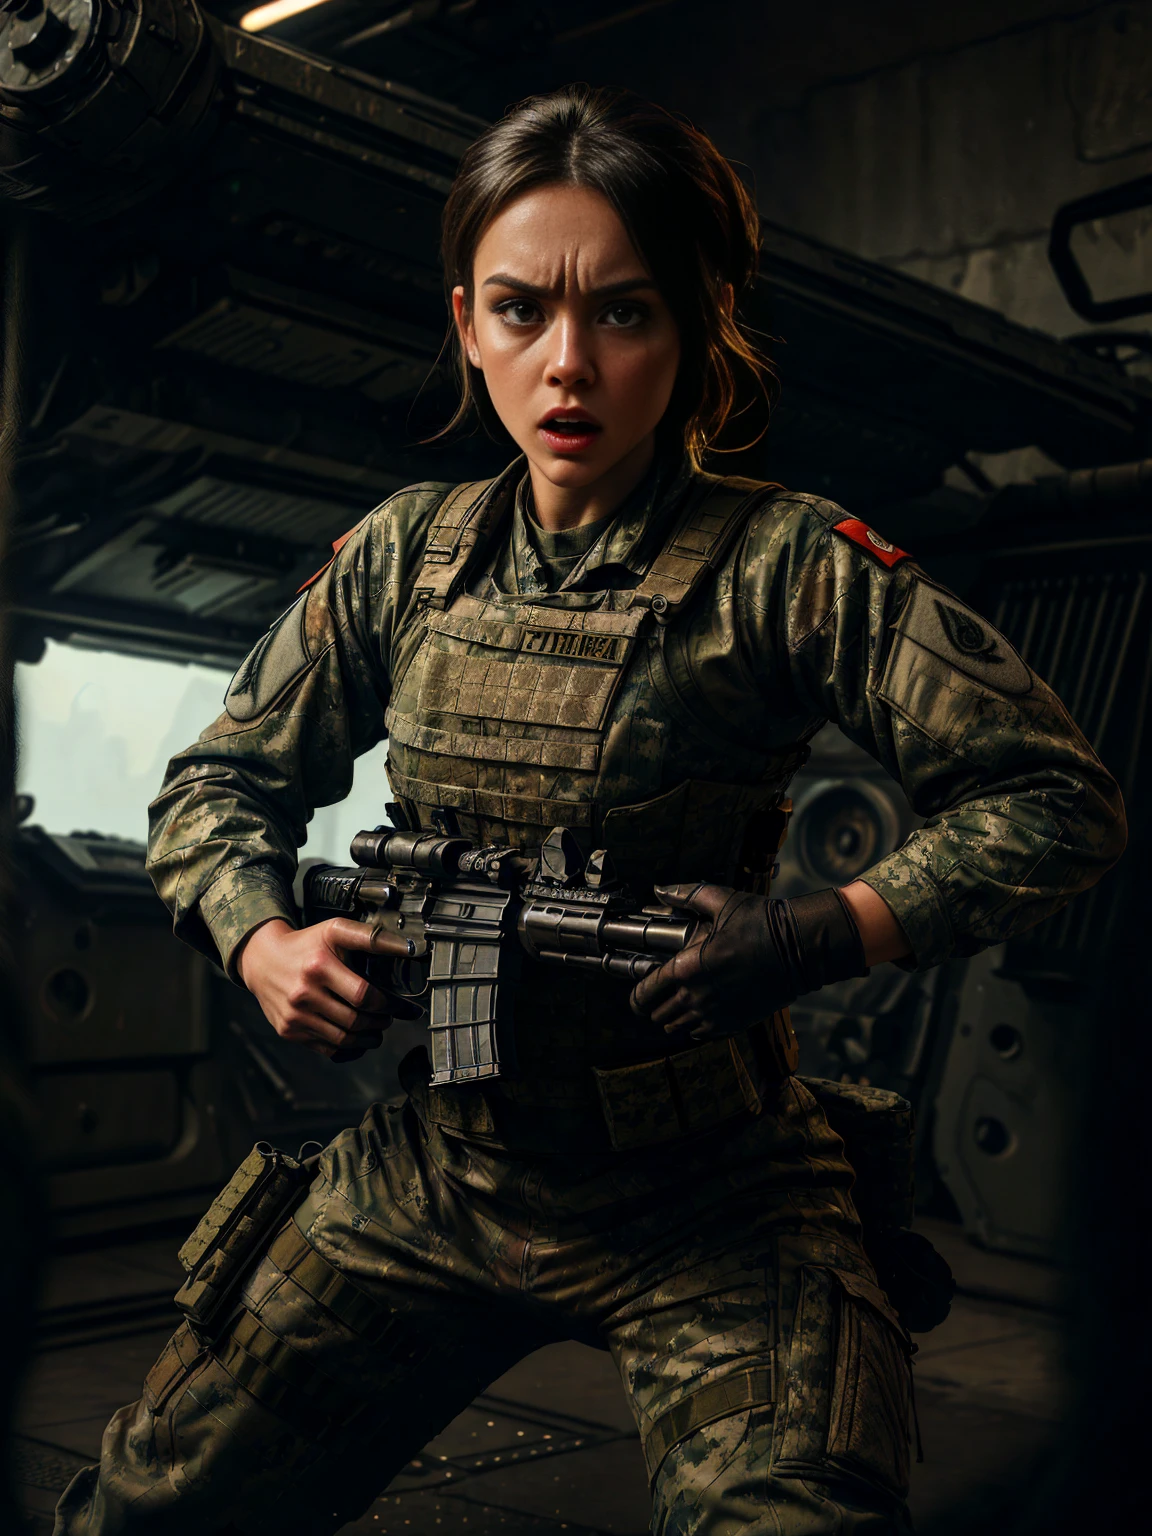 beautiful young woman in tight combat suit:1.3, holding a machine gun, action pose, looking at viewer:1.2, blurred background, gritty photo, HD, 8k, hyper realistic, chiaroscuro lighting, military aesthetics, high-tech weapon, expression intense, muscular build, tactical equipment, cinematic composition